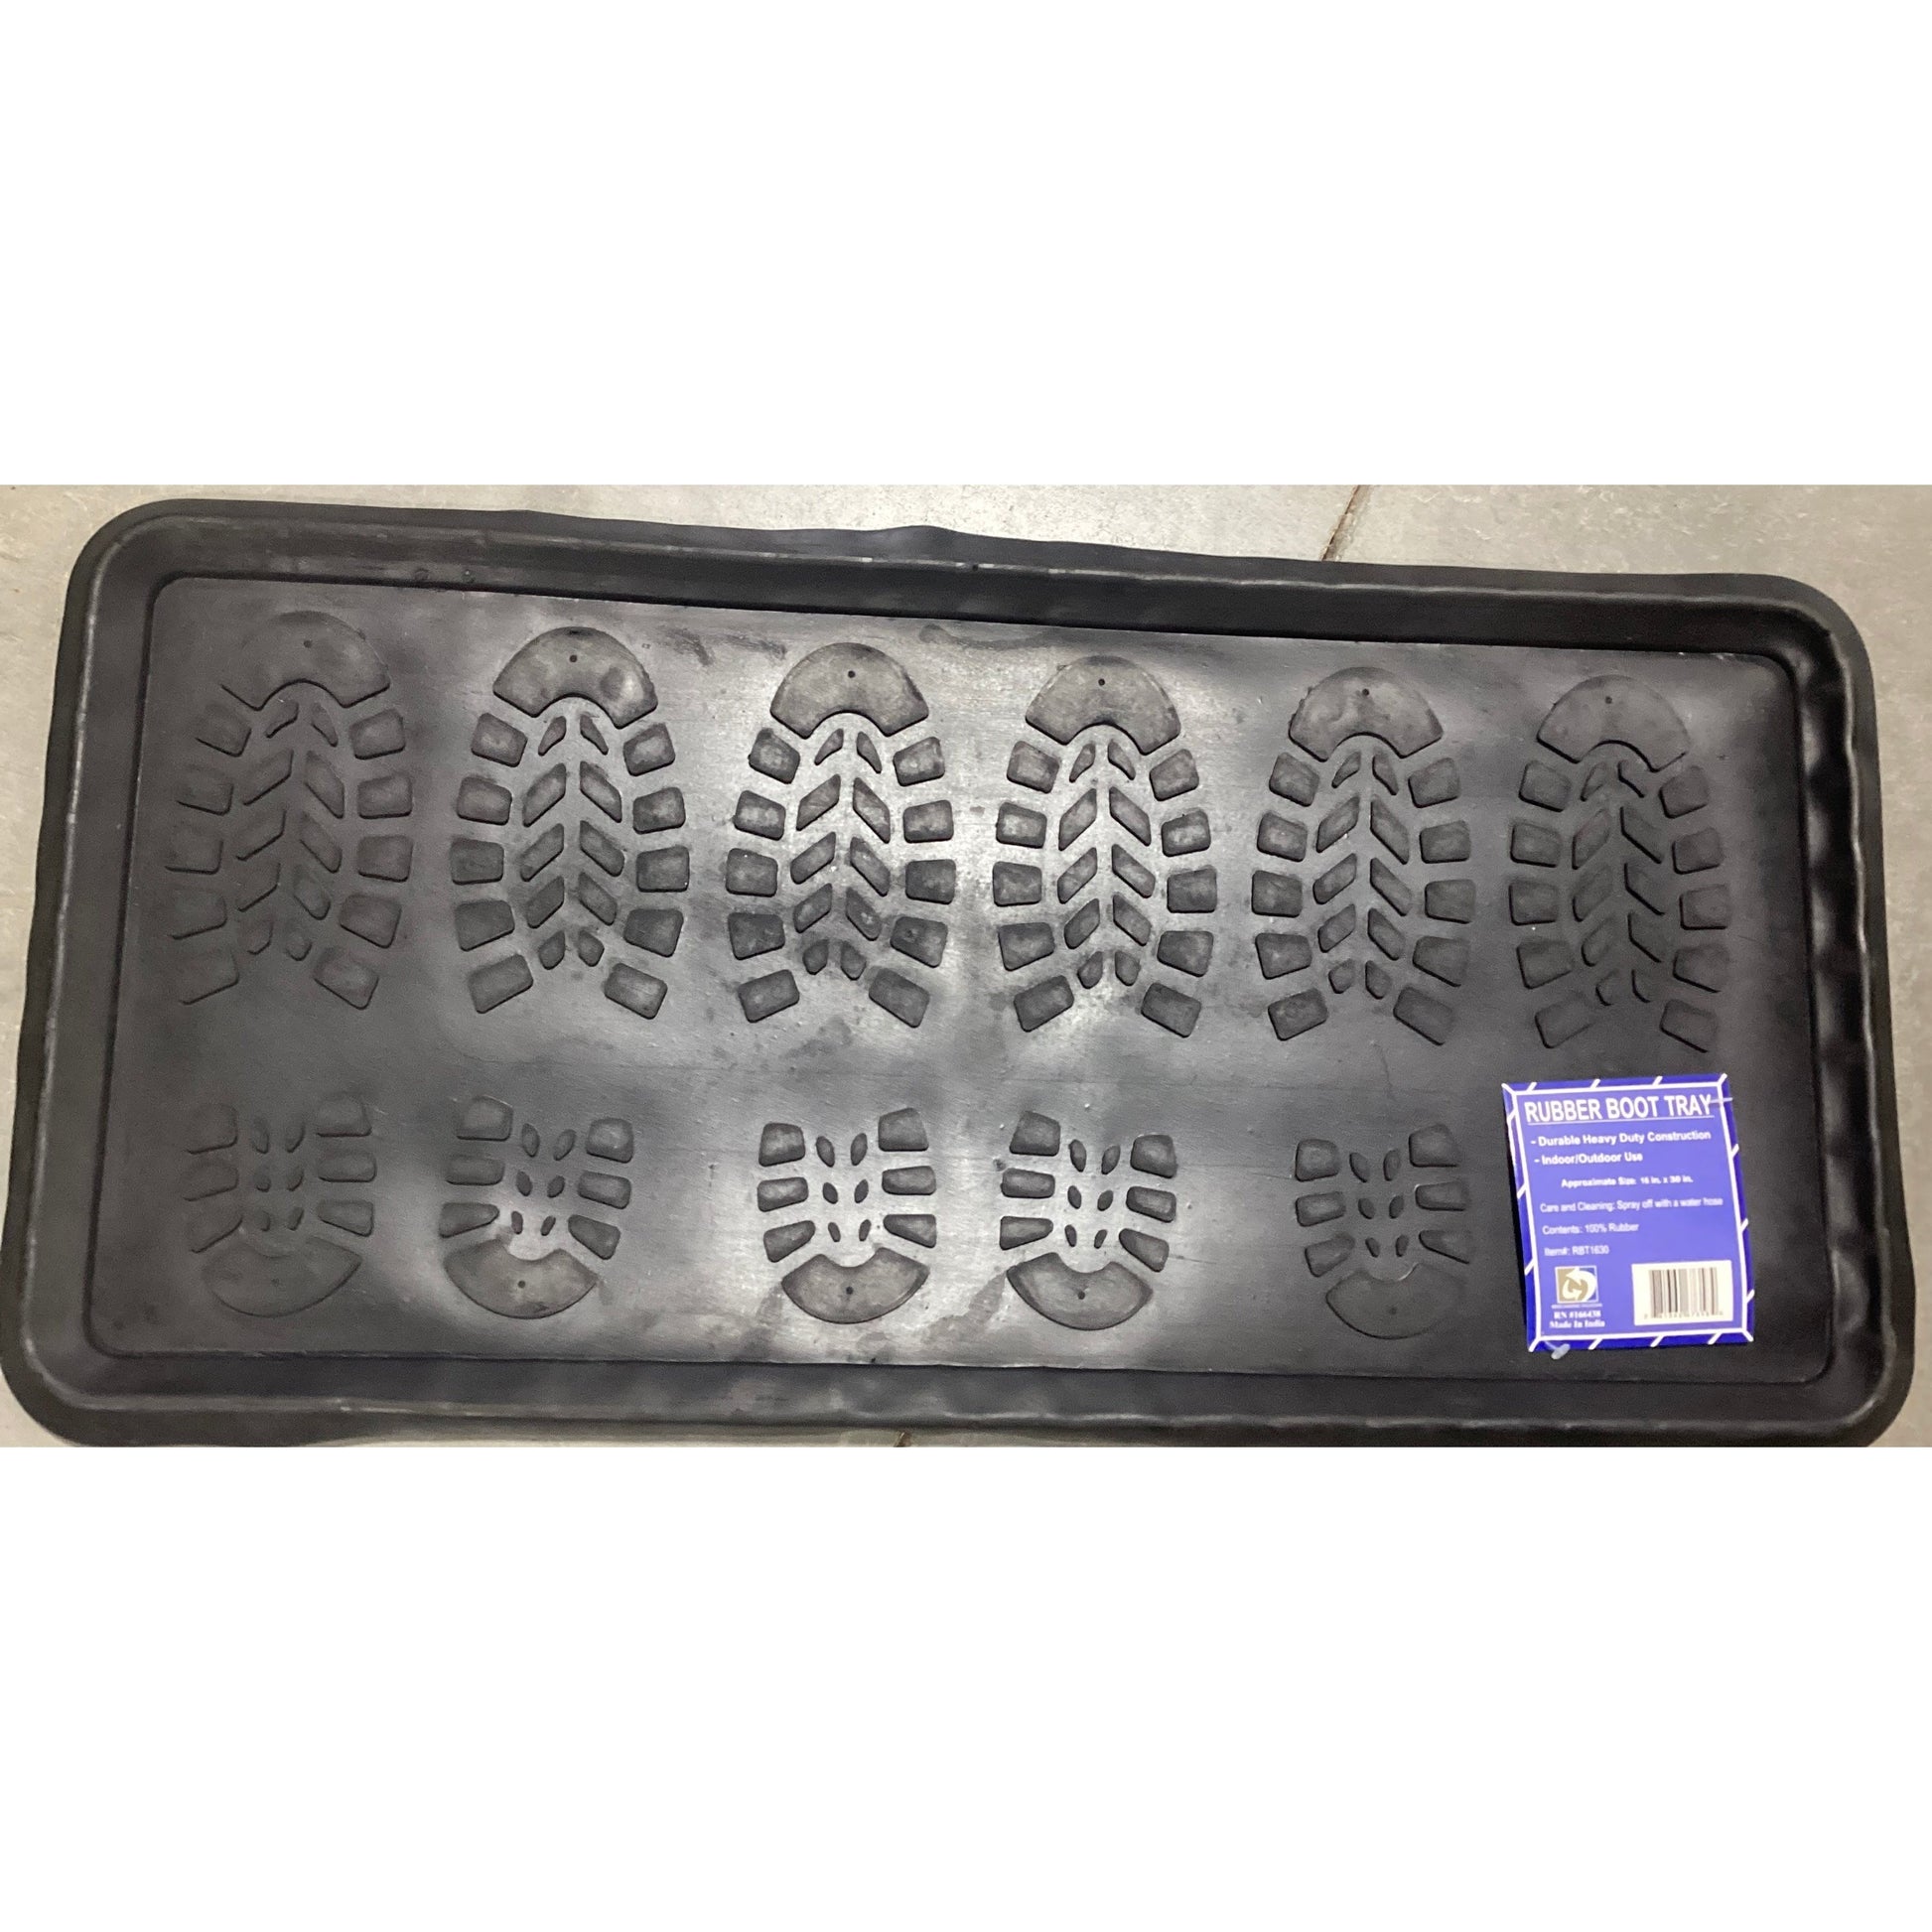 A black rubber tray with a picture of shoes, designed for holding boots and preventing dirt and water from spreading.